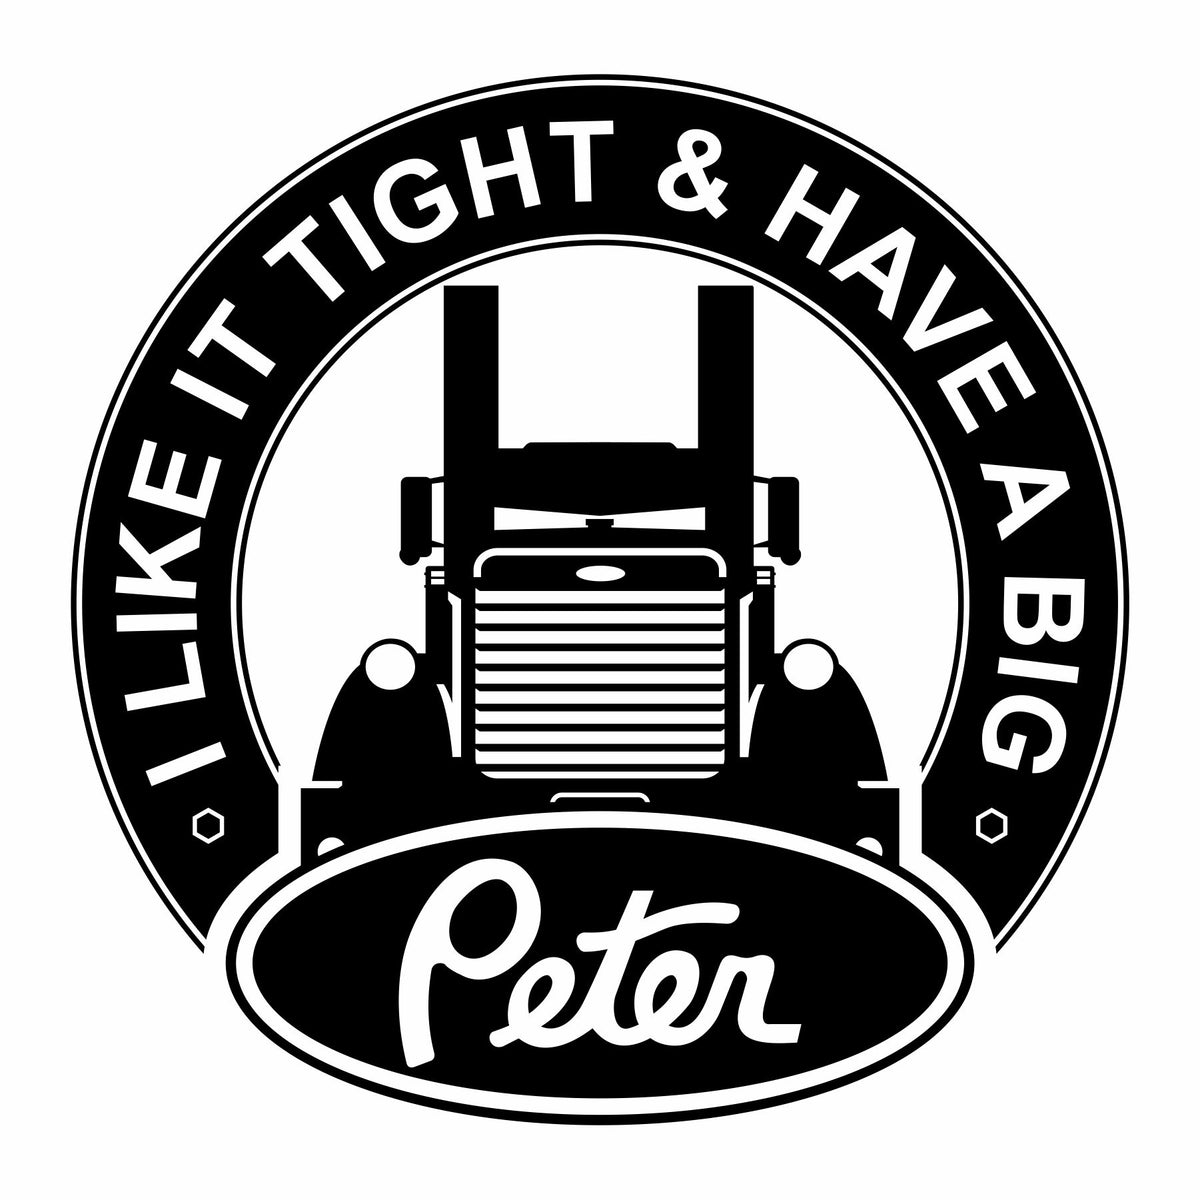 I Like It Tight and Have a Big Peter - Vinyl Decal - Free Shipping